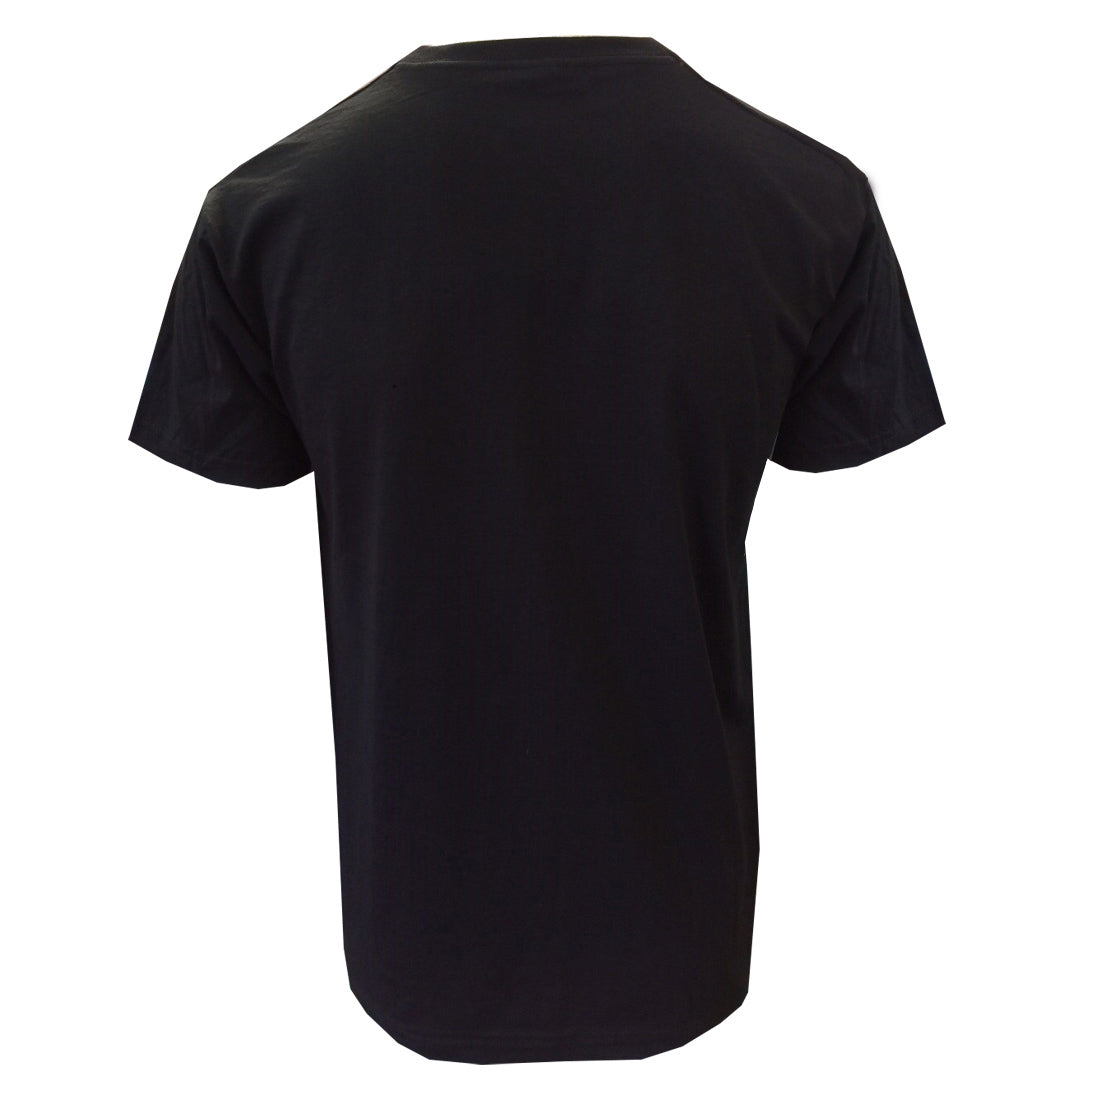 The back of a Guinness Six Nations Black T-shirt featuring the Guinness UK logo on a white background.